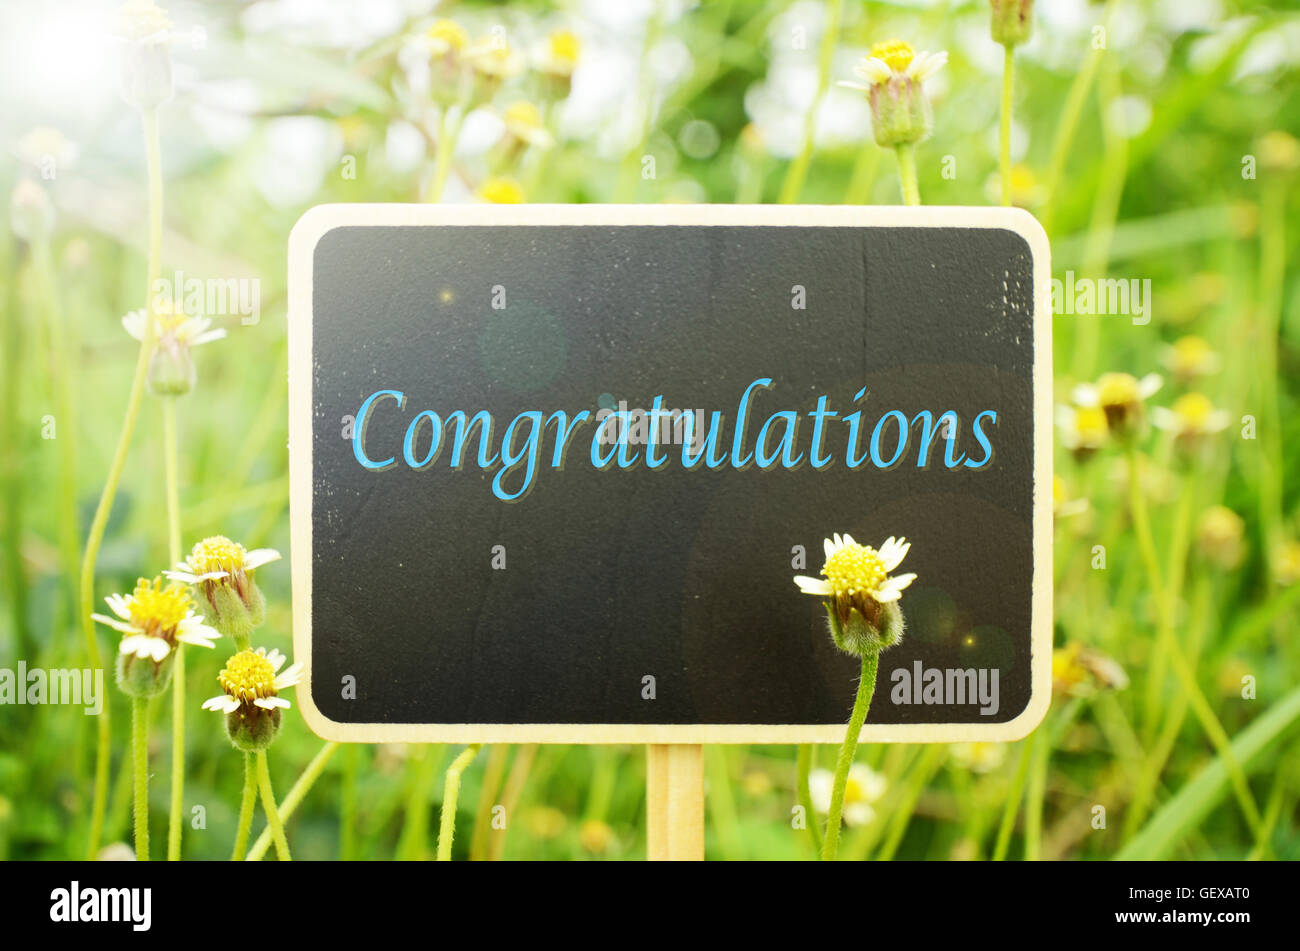 Wooden board signs on Mexican daisy flowers background with warm light tone. Congratulations. Stock Photo